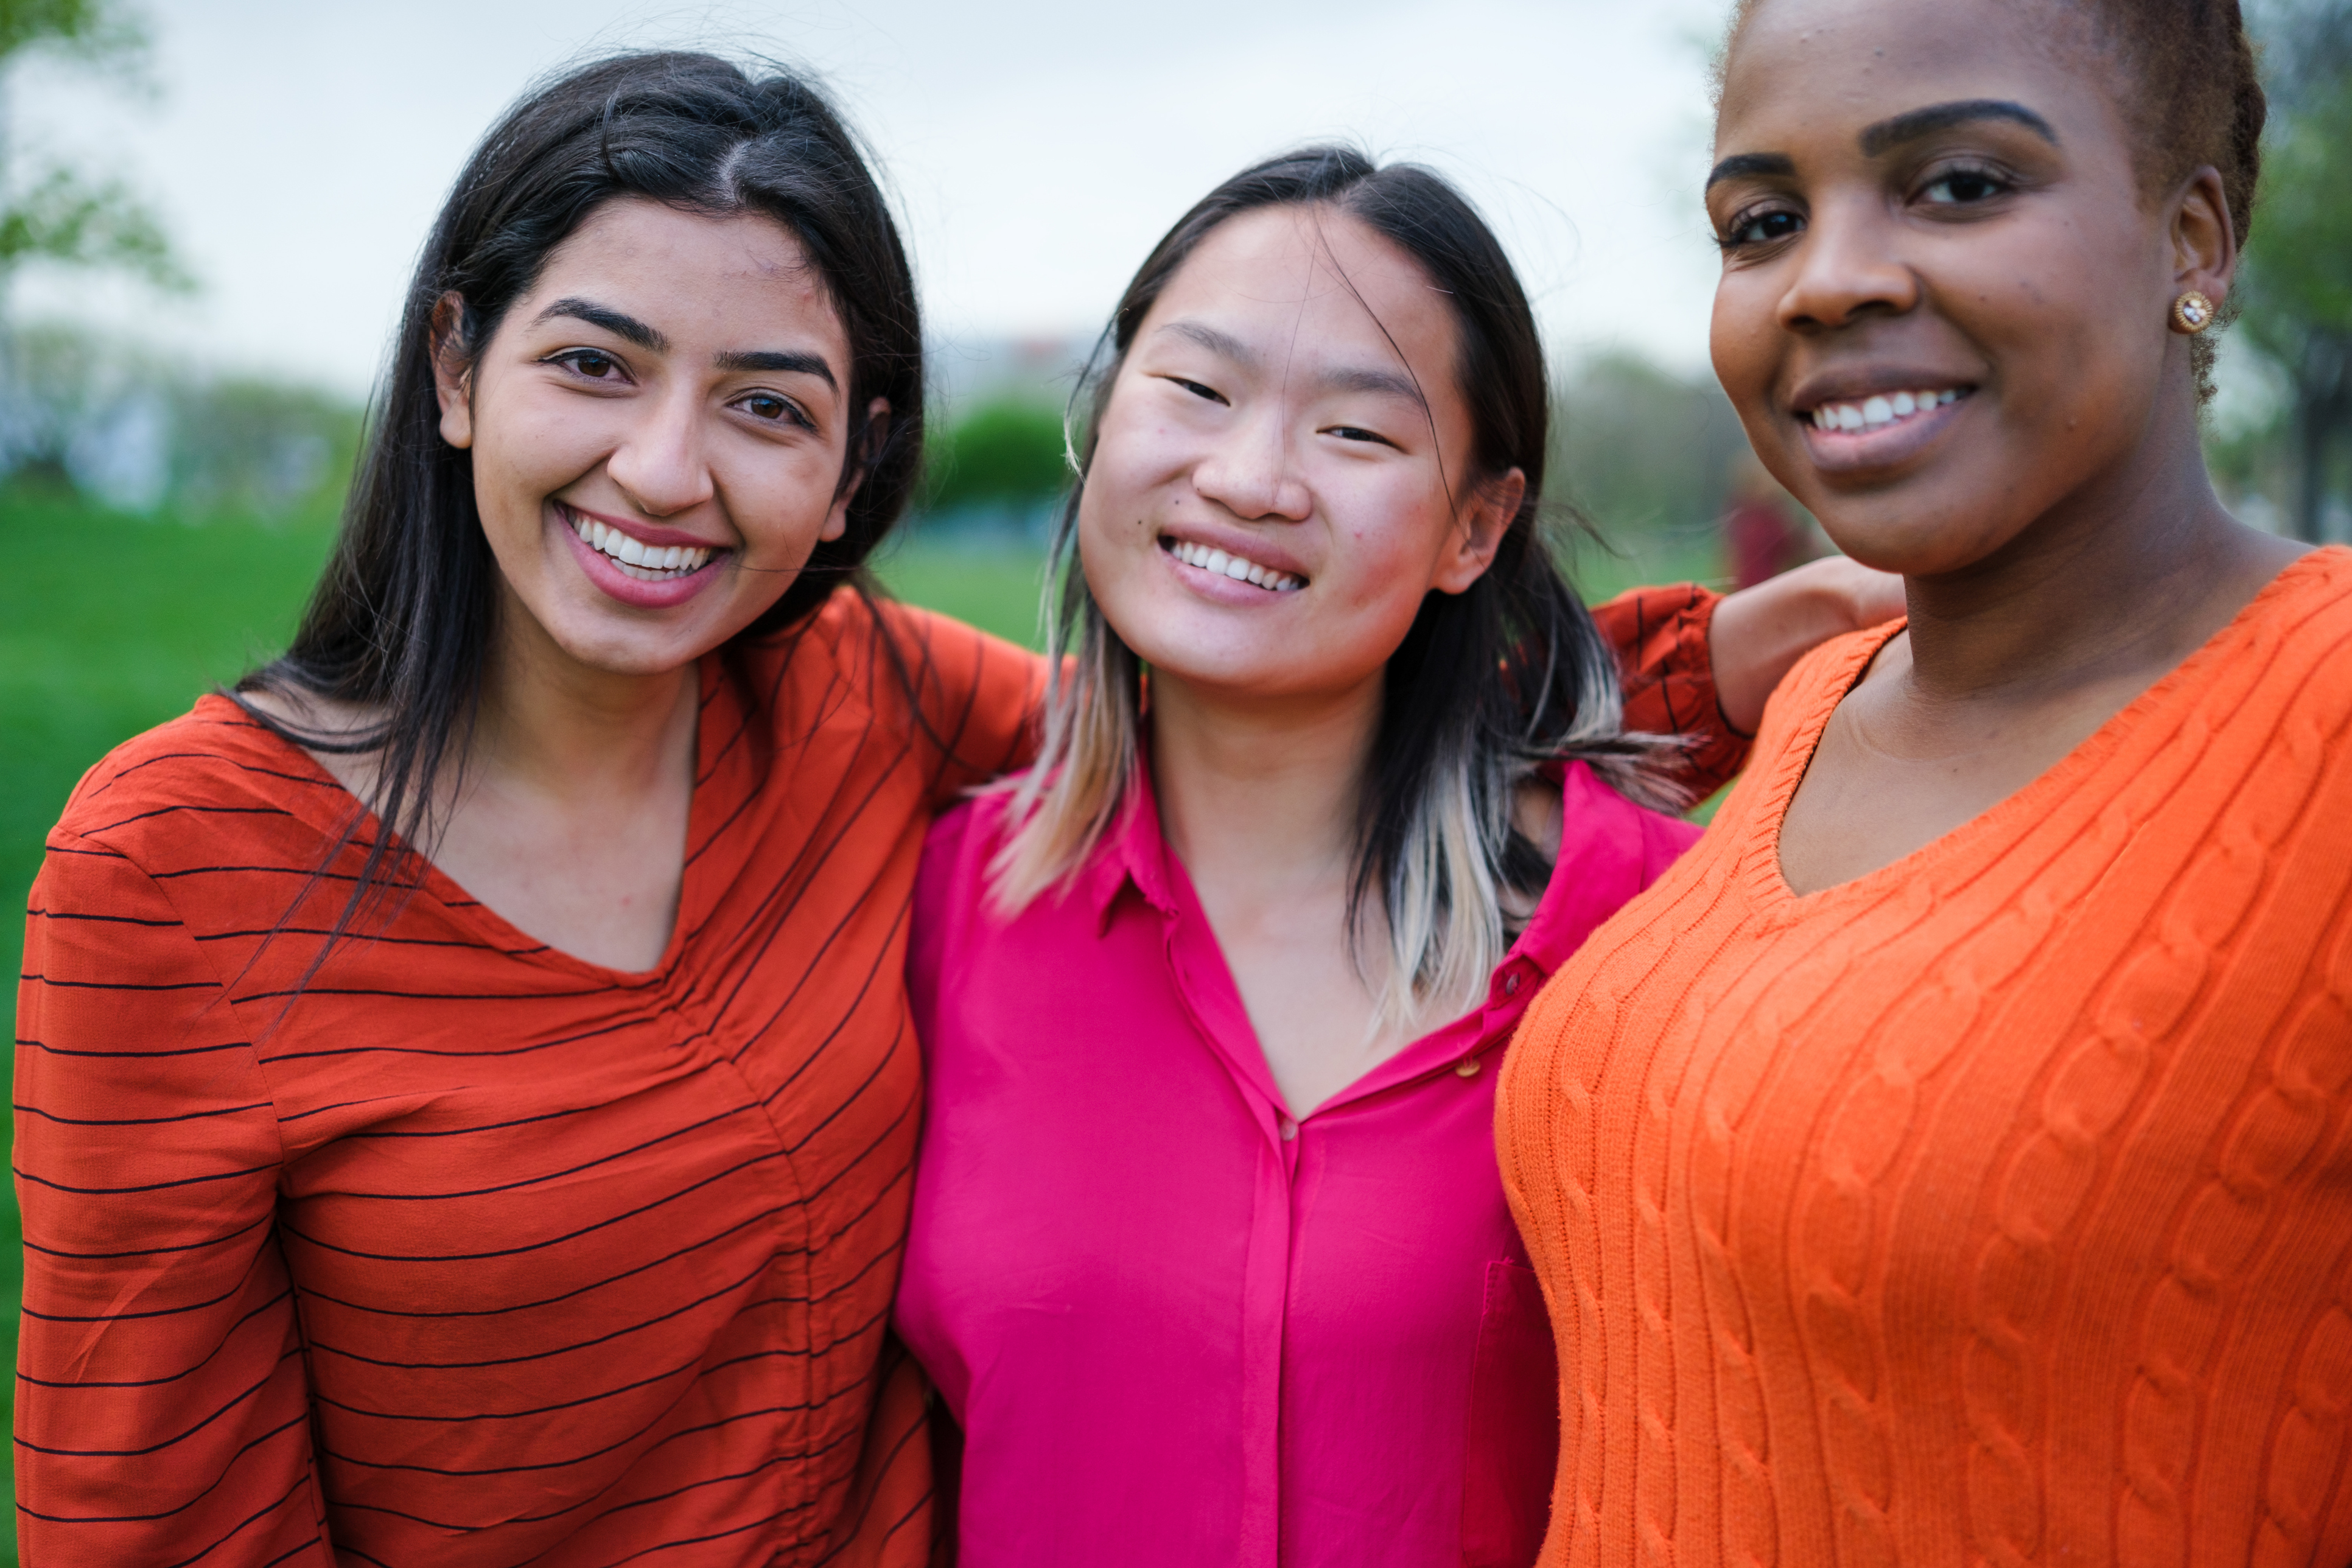 Diverse trio of women in cheerful clothing smile at the camera